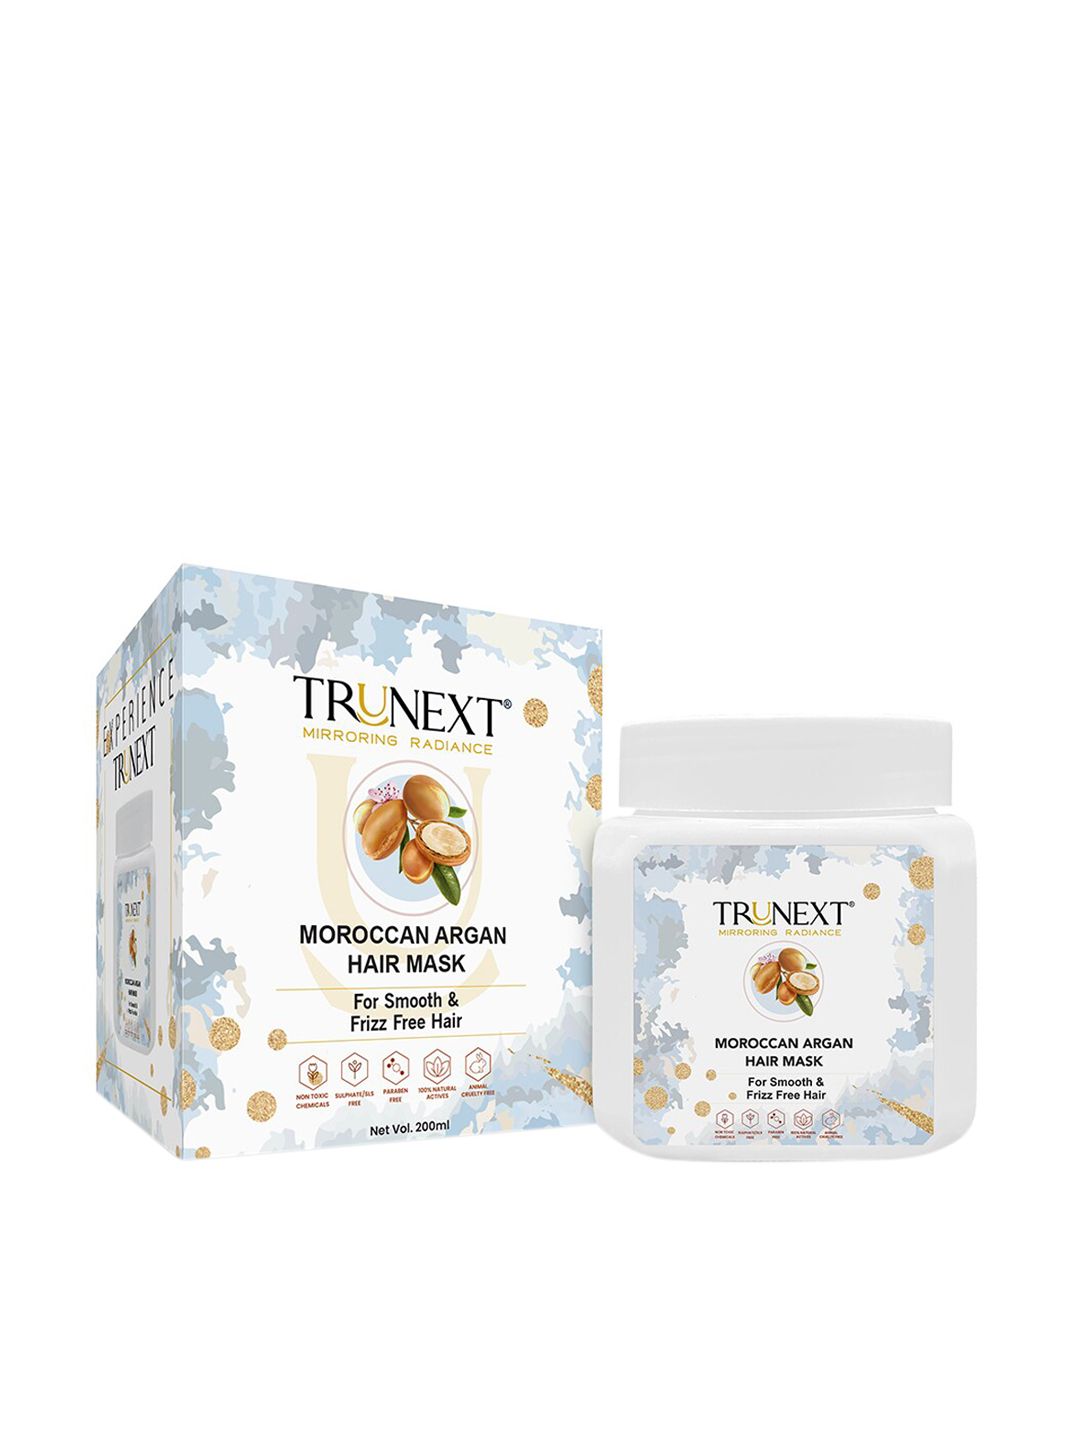 TRUNEXT Moroccan Argan Hair Mask for Smooth & Frizz-Free Hair - 200ml Price in India